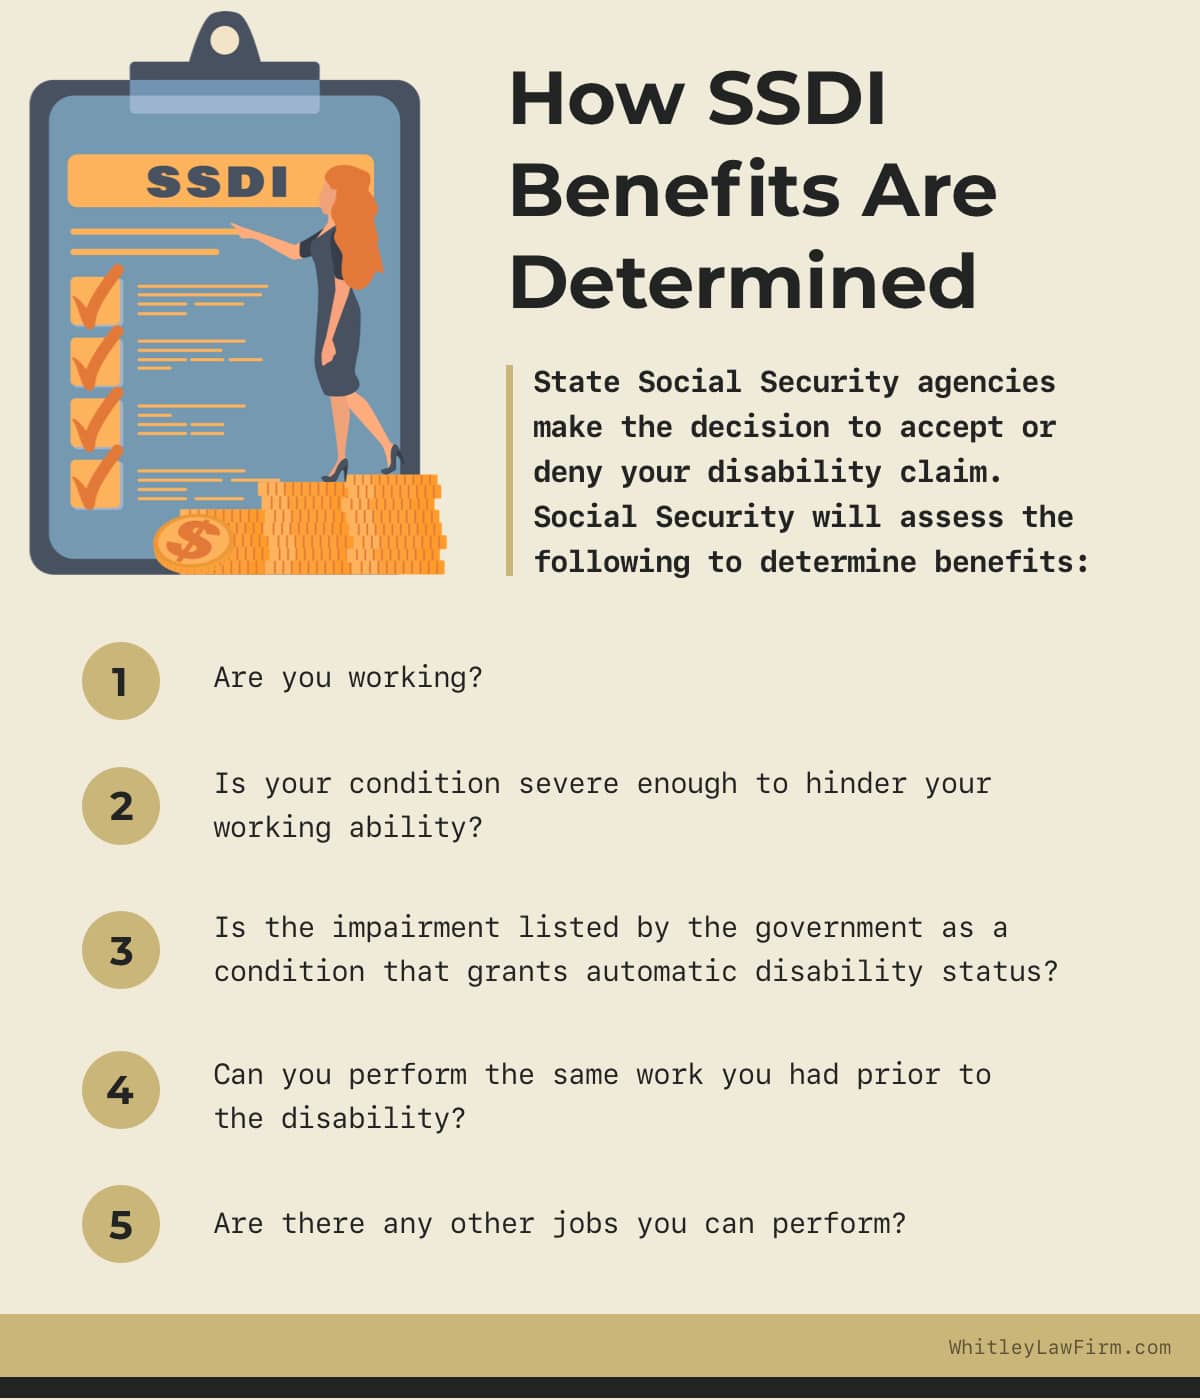 How SSDI Benefits Are Determined | Whitley Law Firm